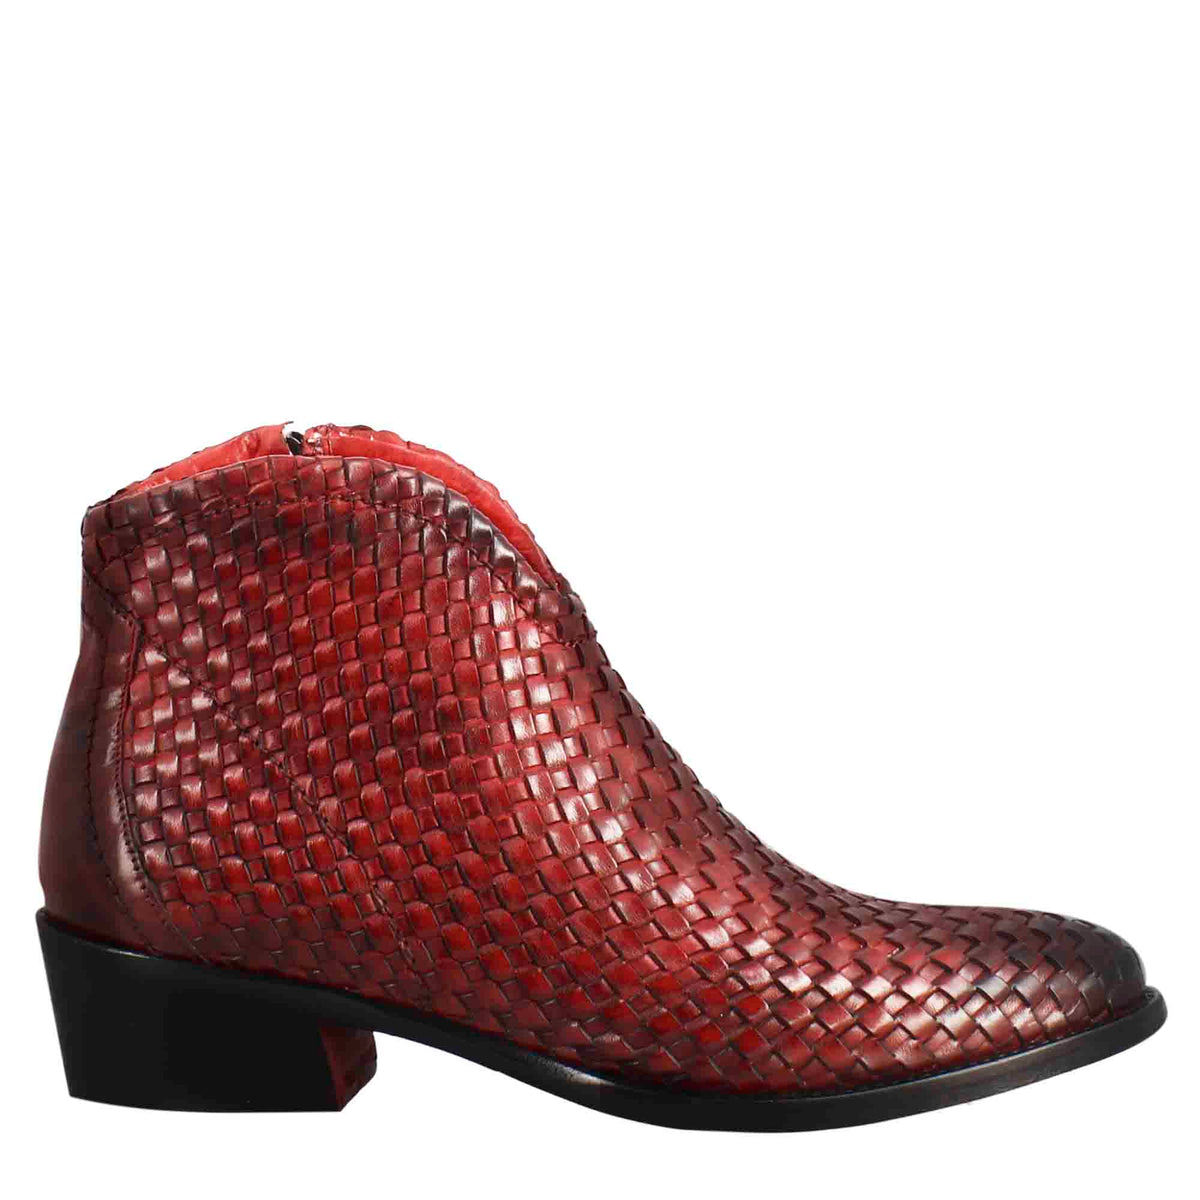 Women's ankle boot in woven leather with red medium heel